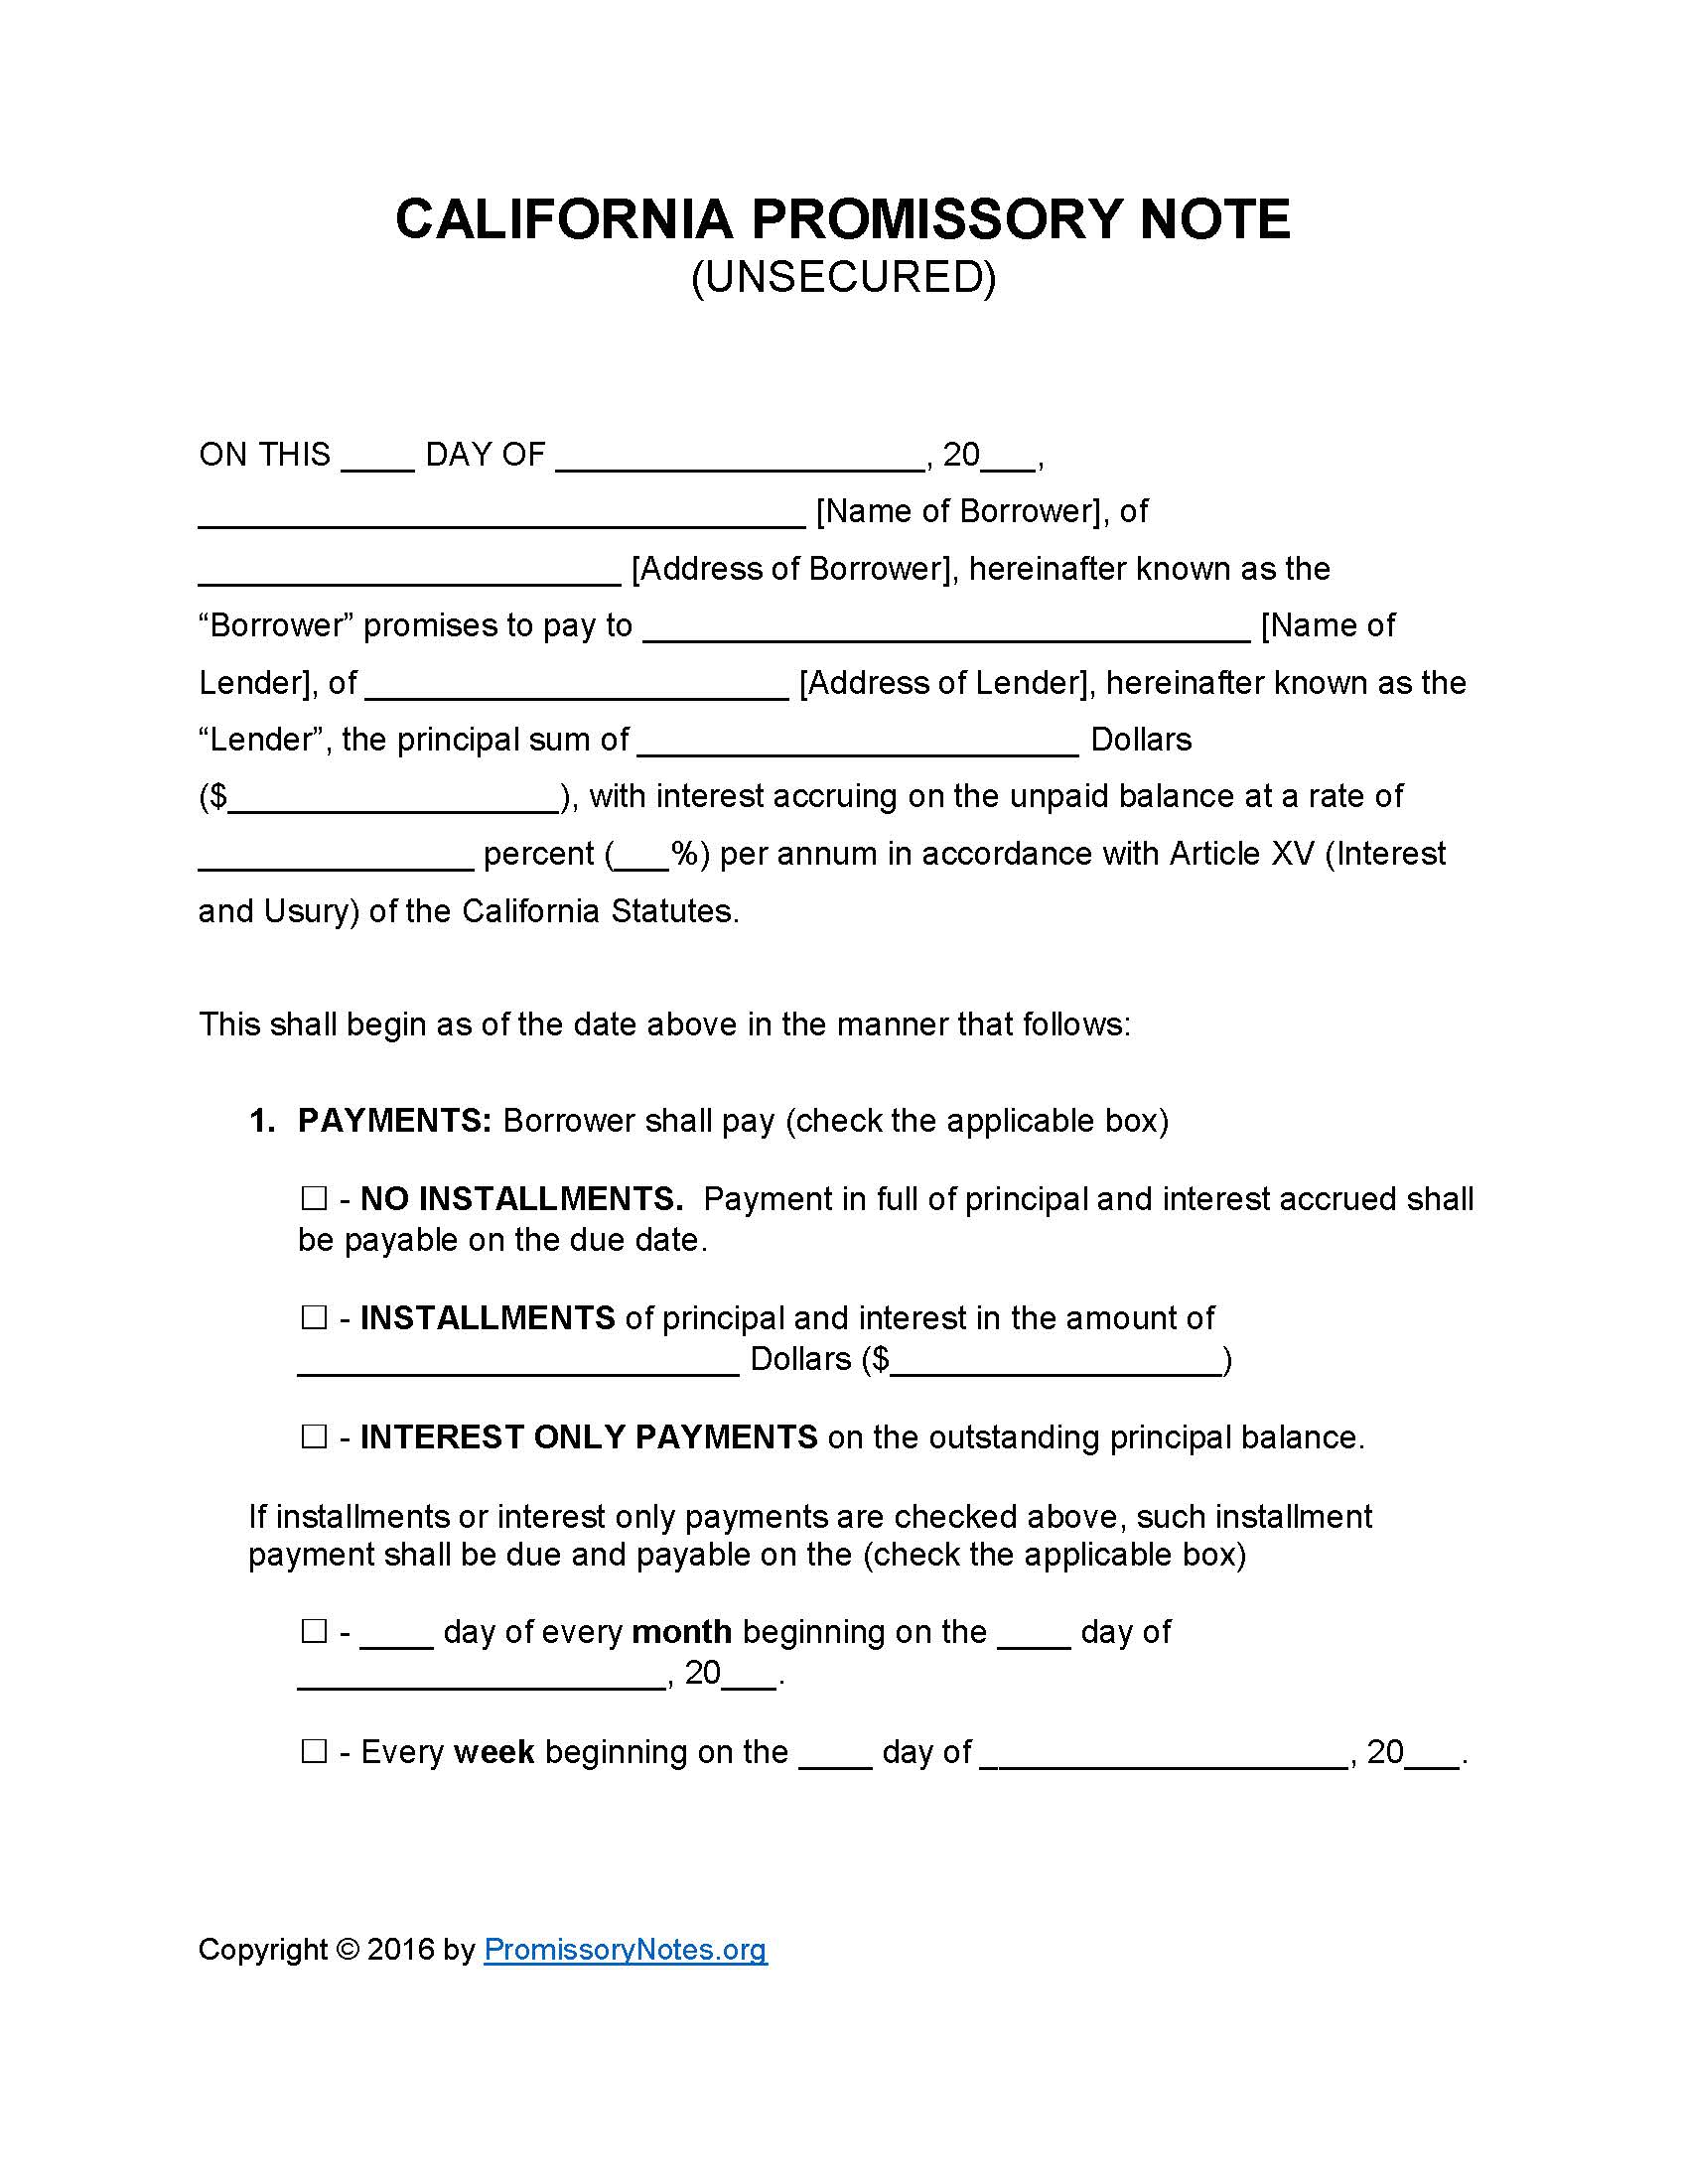 california-unsecured-promissory-note-form